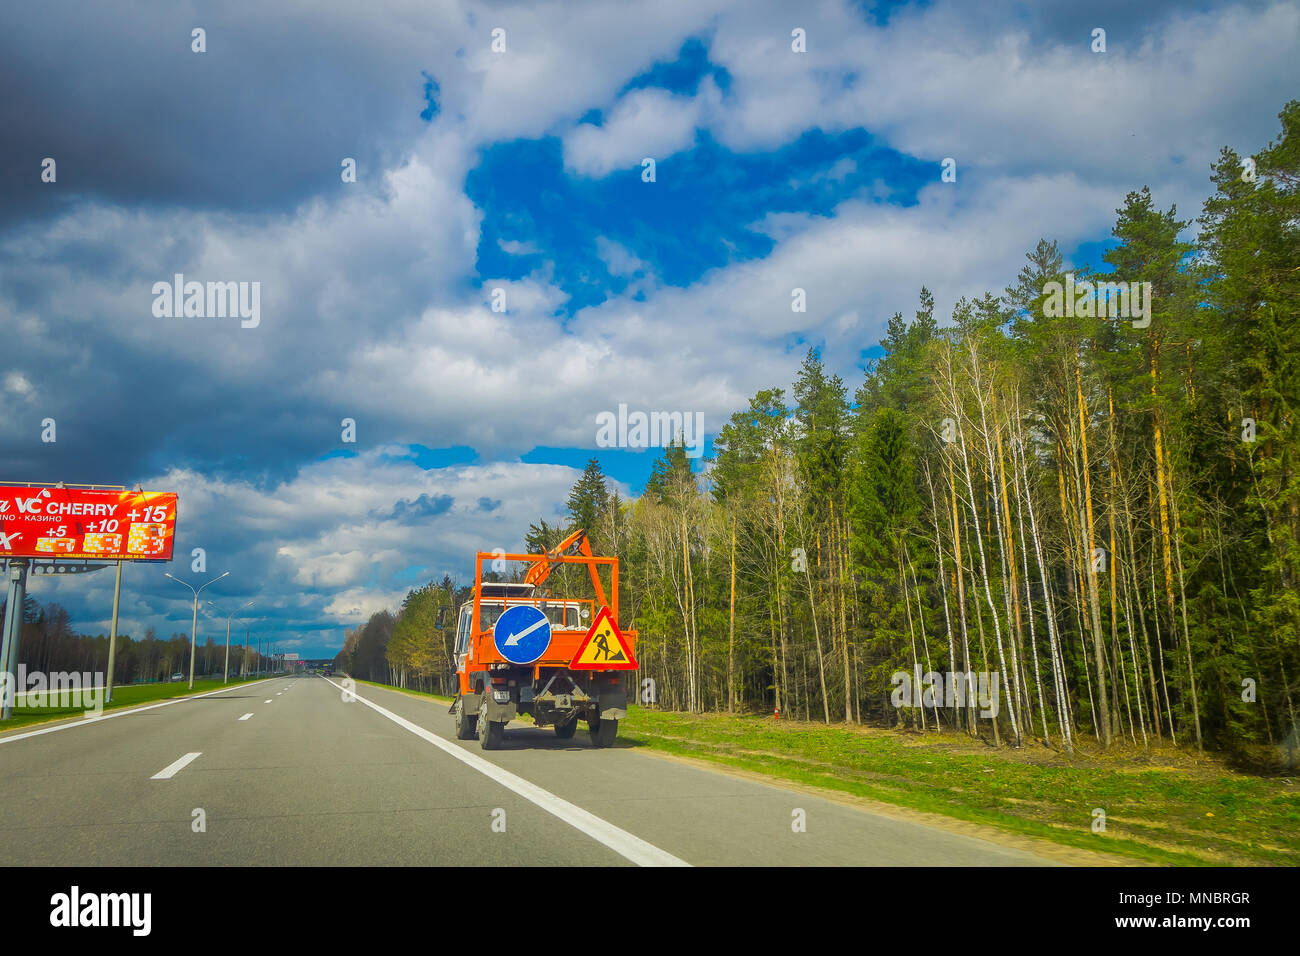 MINSK, BELARUS - MAY 01, 2018: Ooutdoor view of heavy machinery in the highway to the airport of Minsk against dramatic clouds background with trees at each side of the road Stock Photo